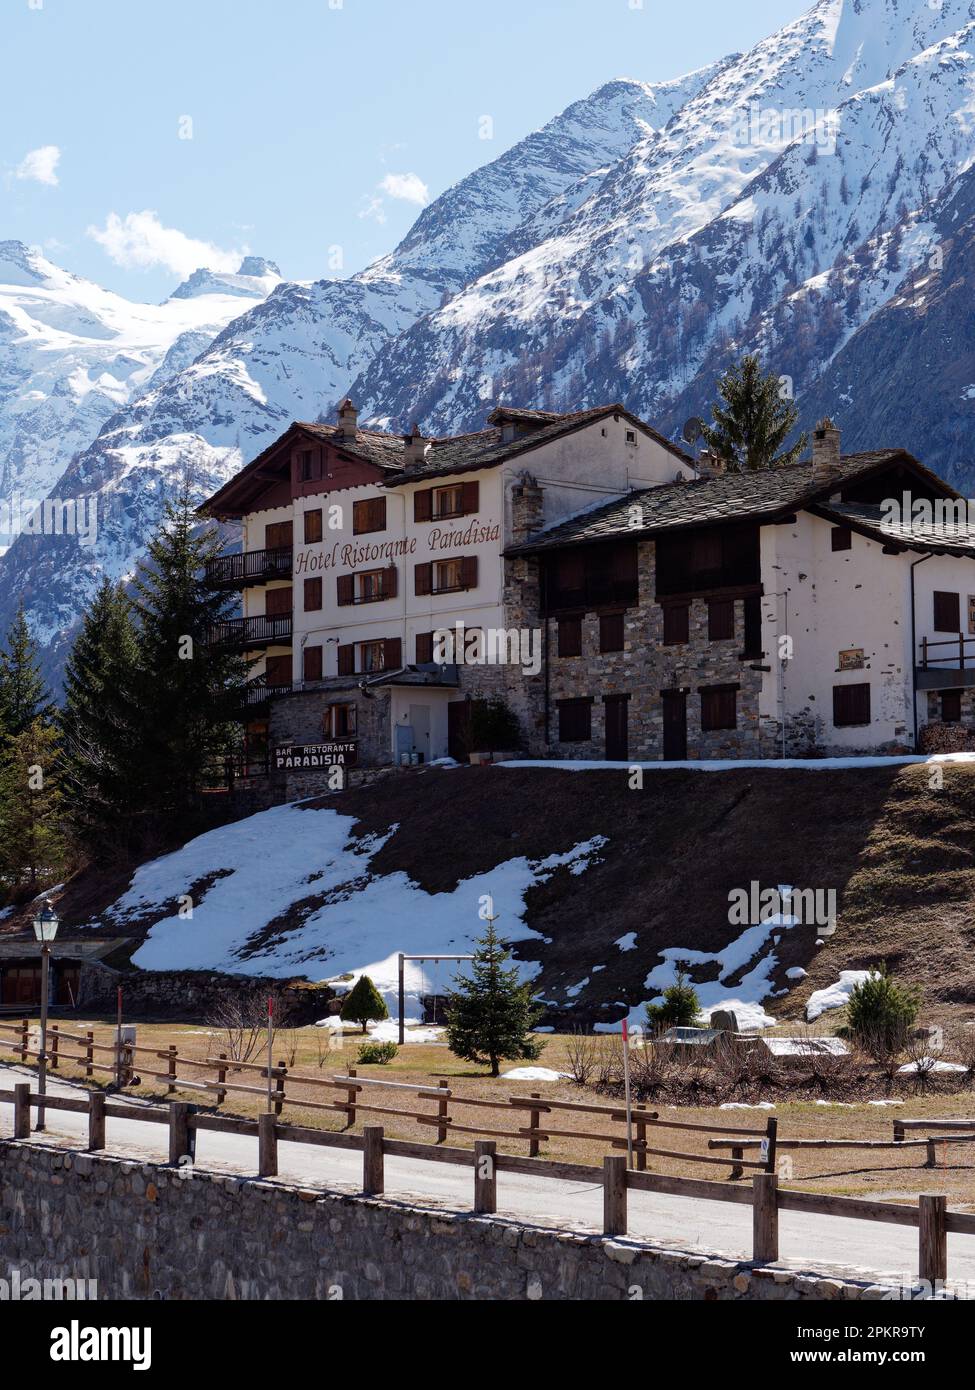 Hotel surrounding by snow covered mountains in Valnontey, Gran Paradiso National Park, Aosta Valley, Italy Stock Photo